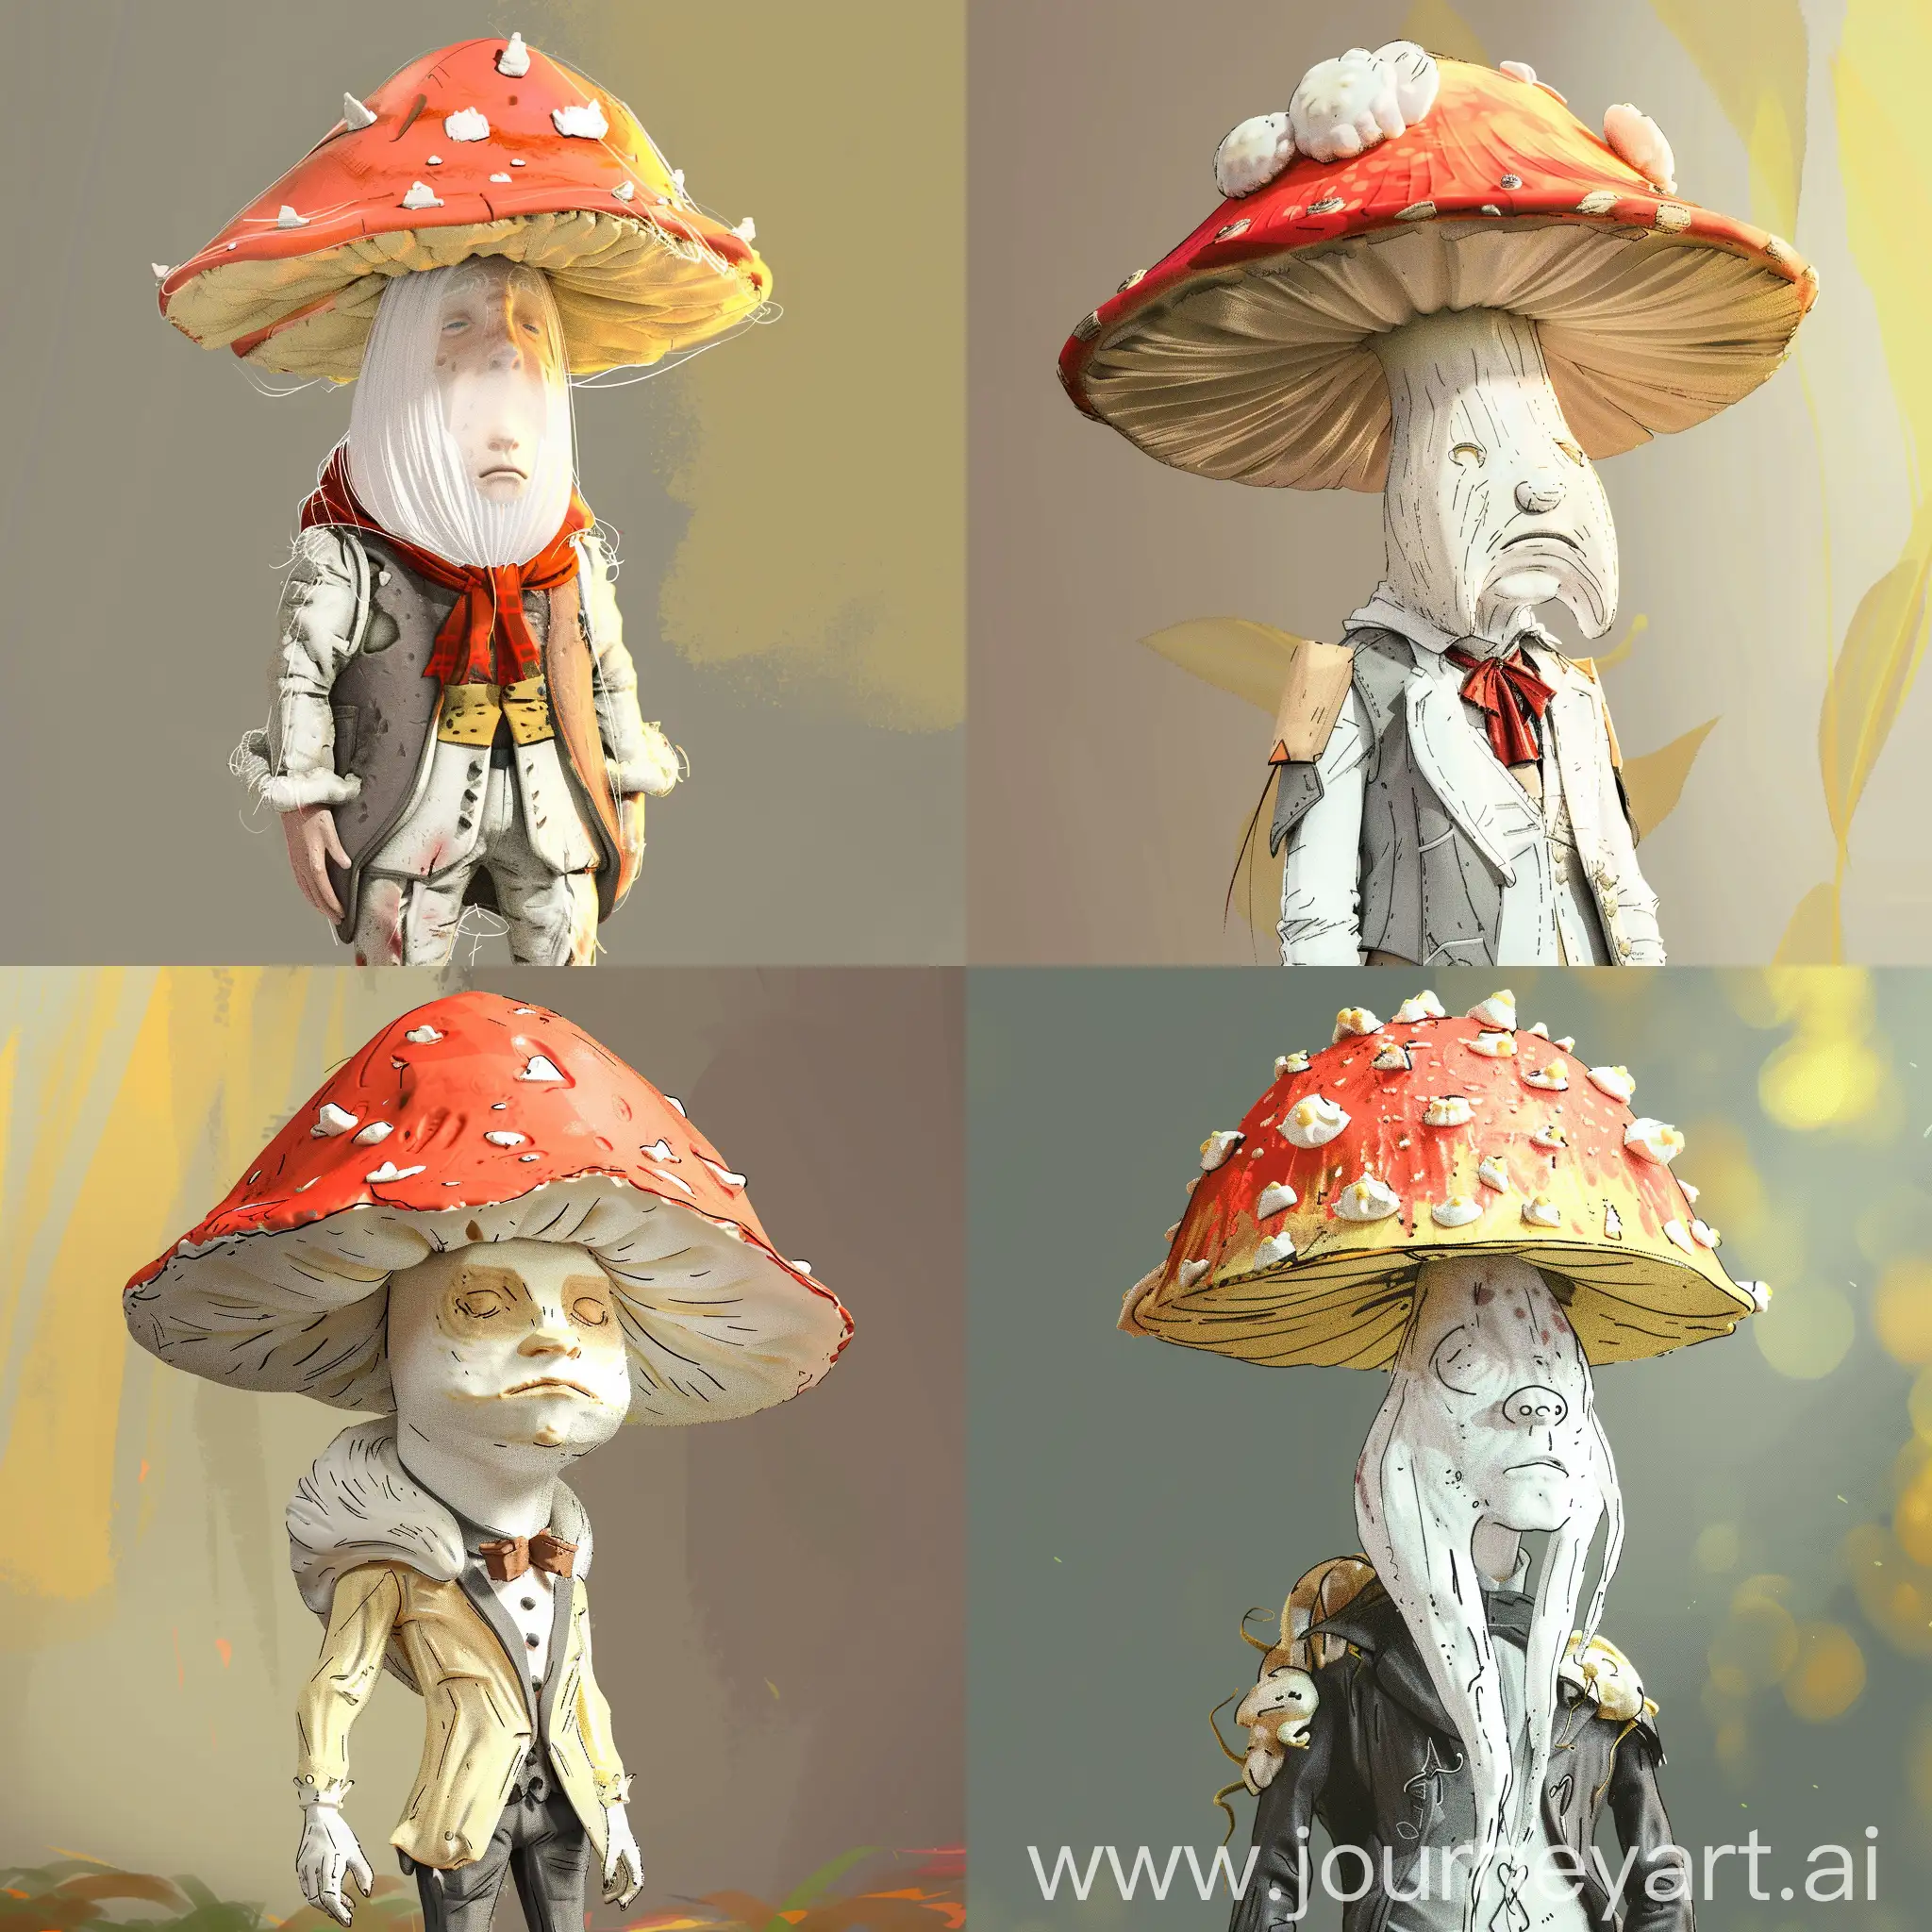 Realistic 3D League of legends style art of a humanoid mushroom with face and costume and white humita.